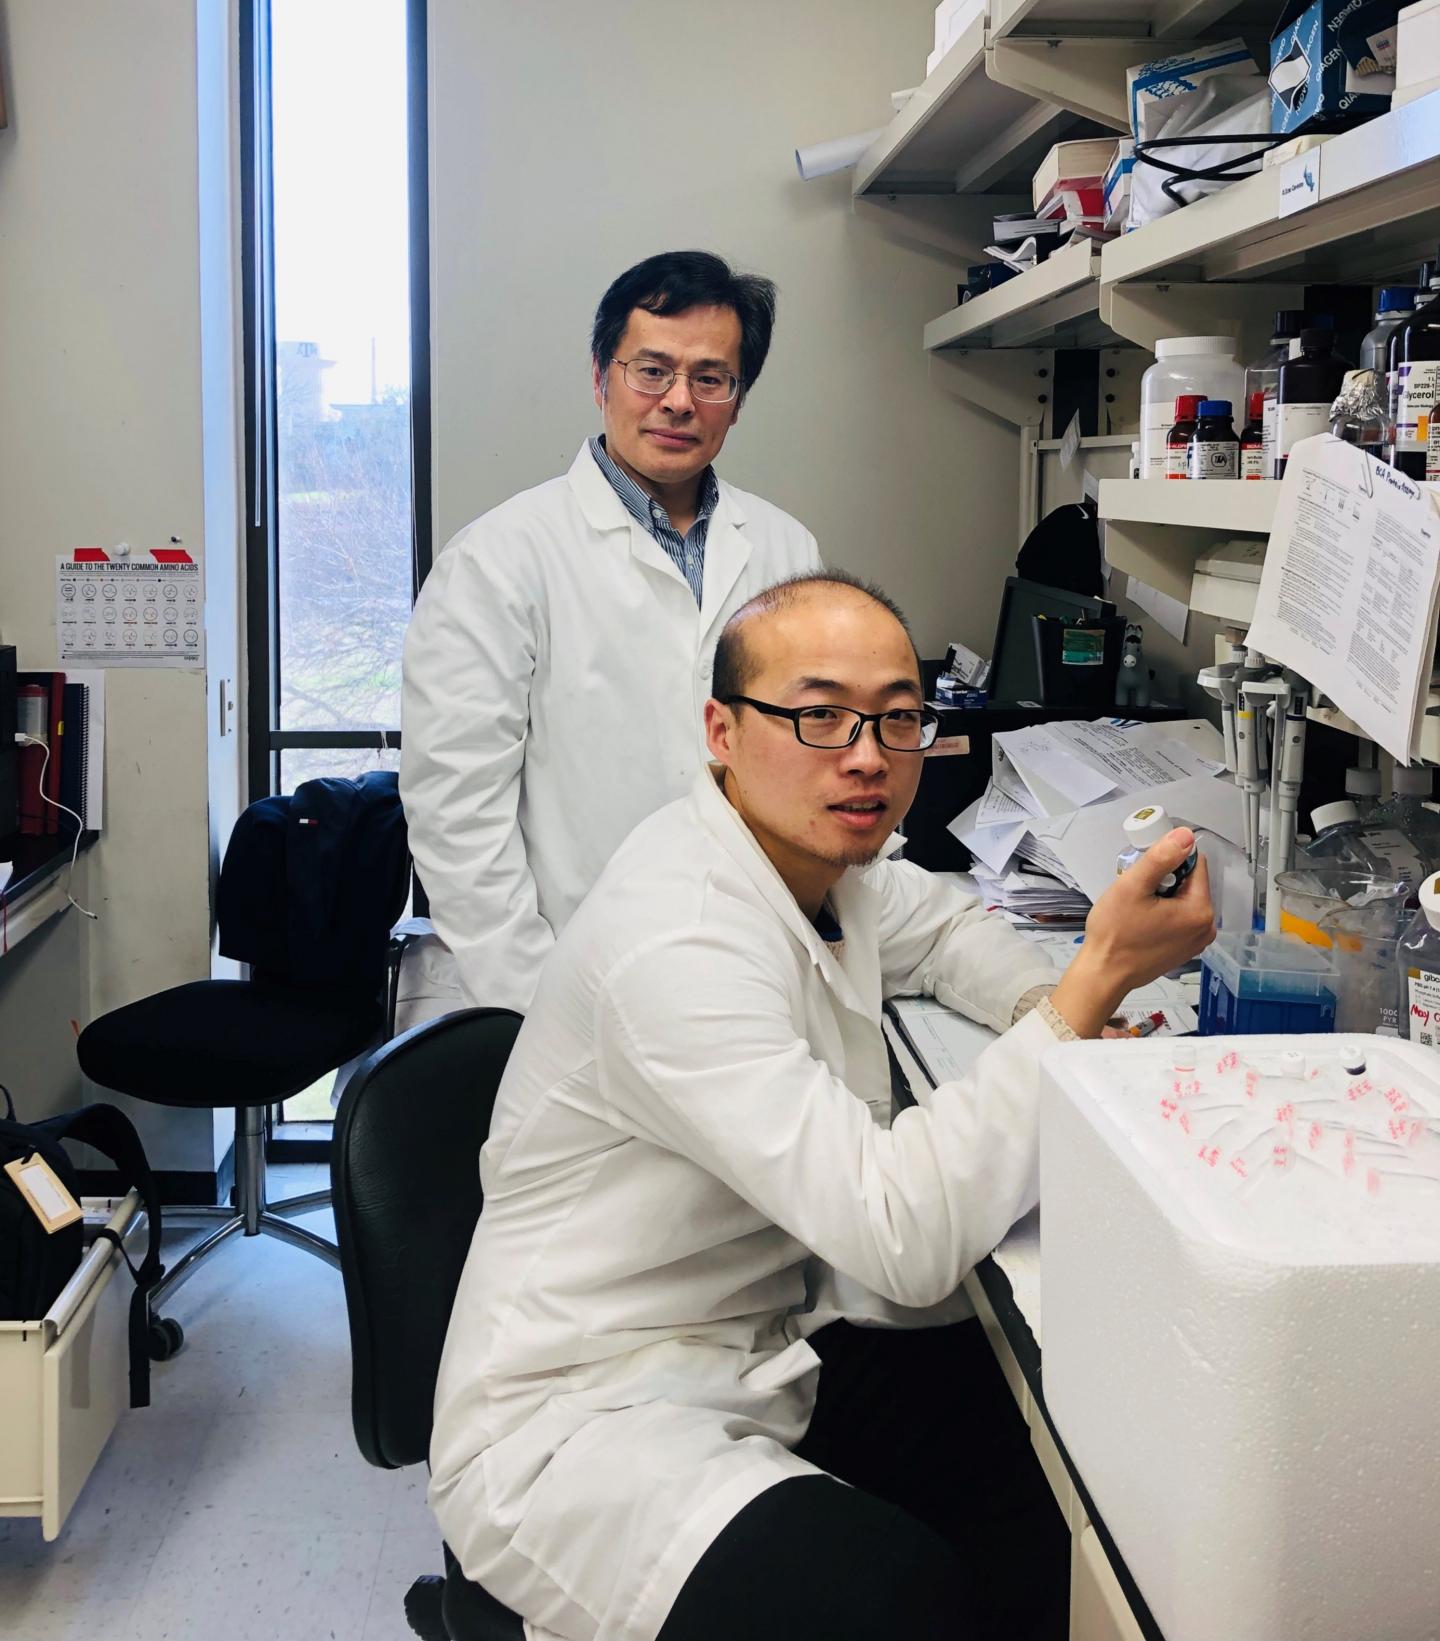 Guo and Yang in Lab